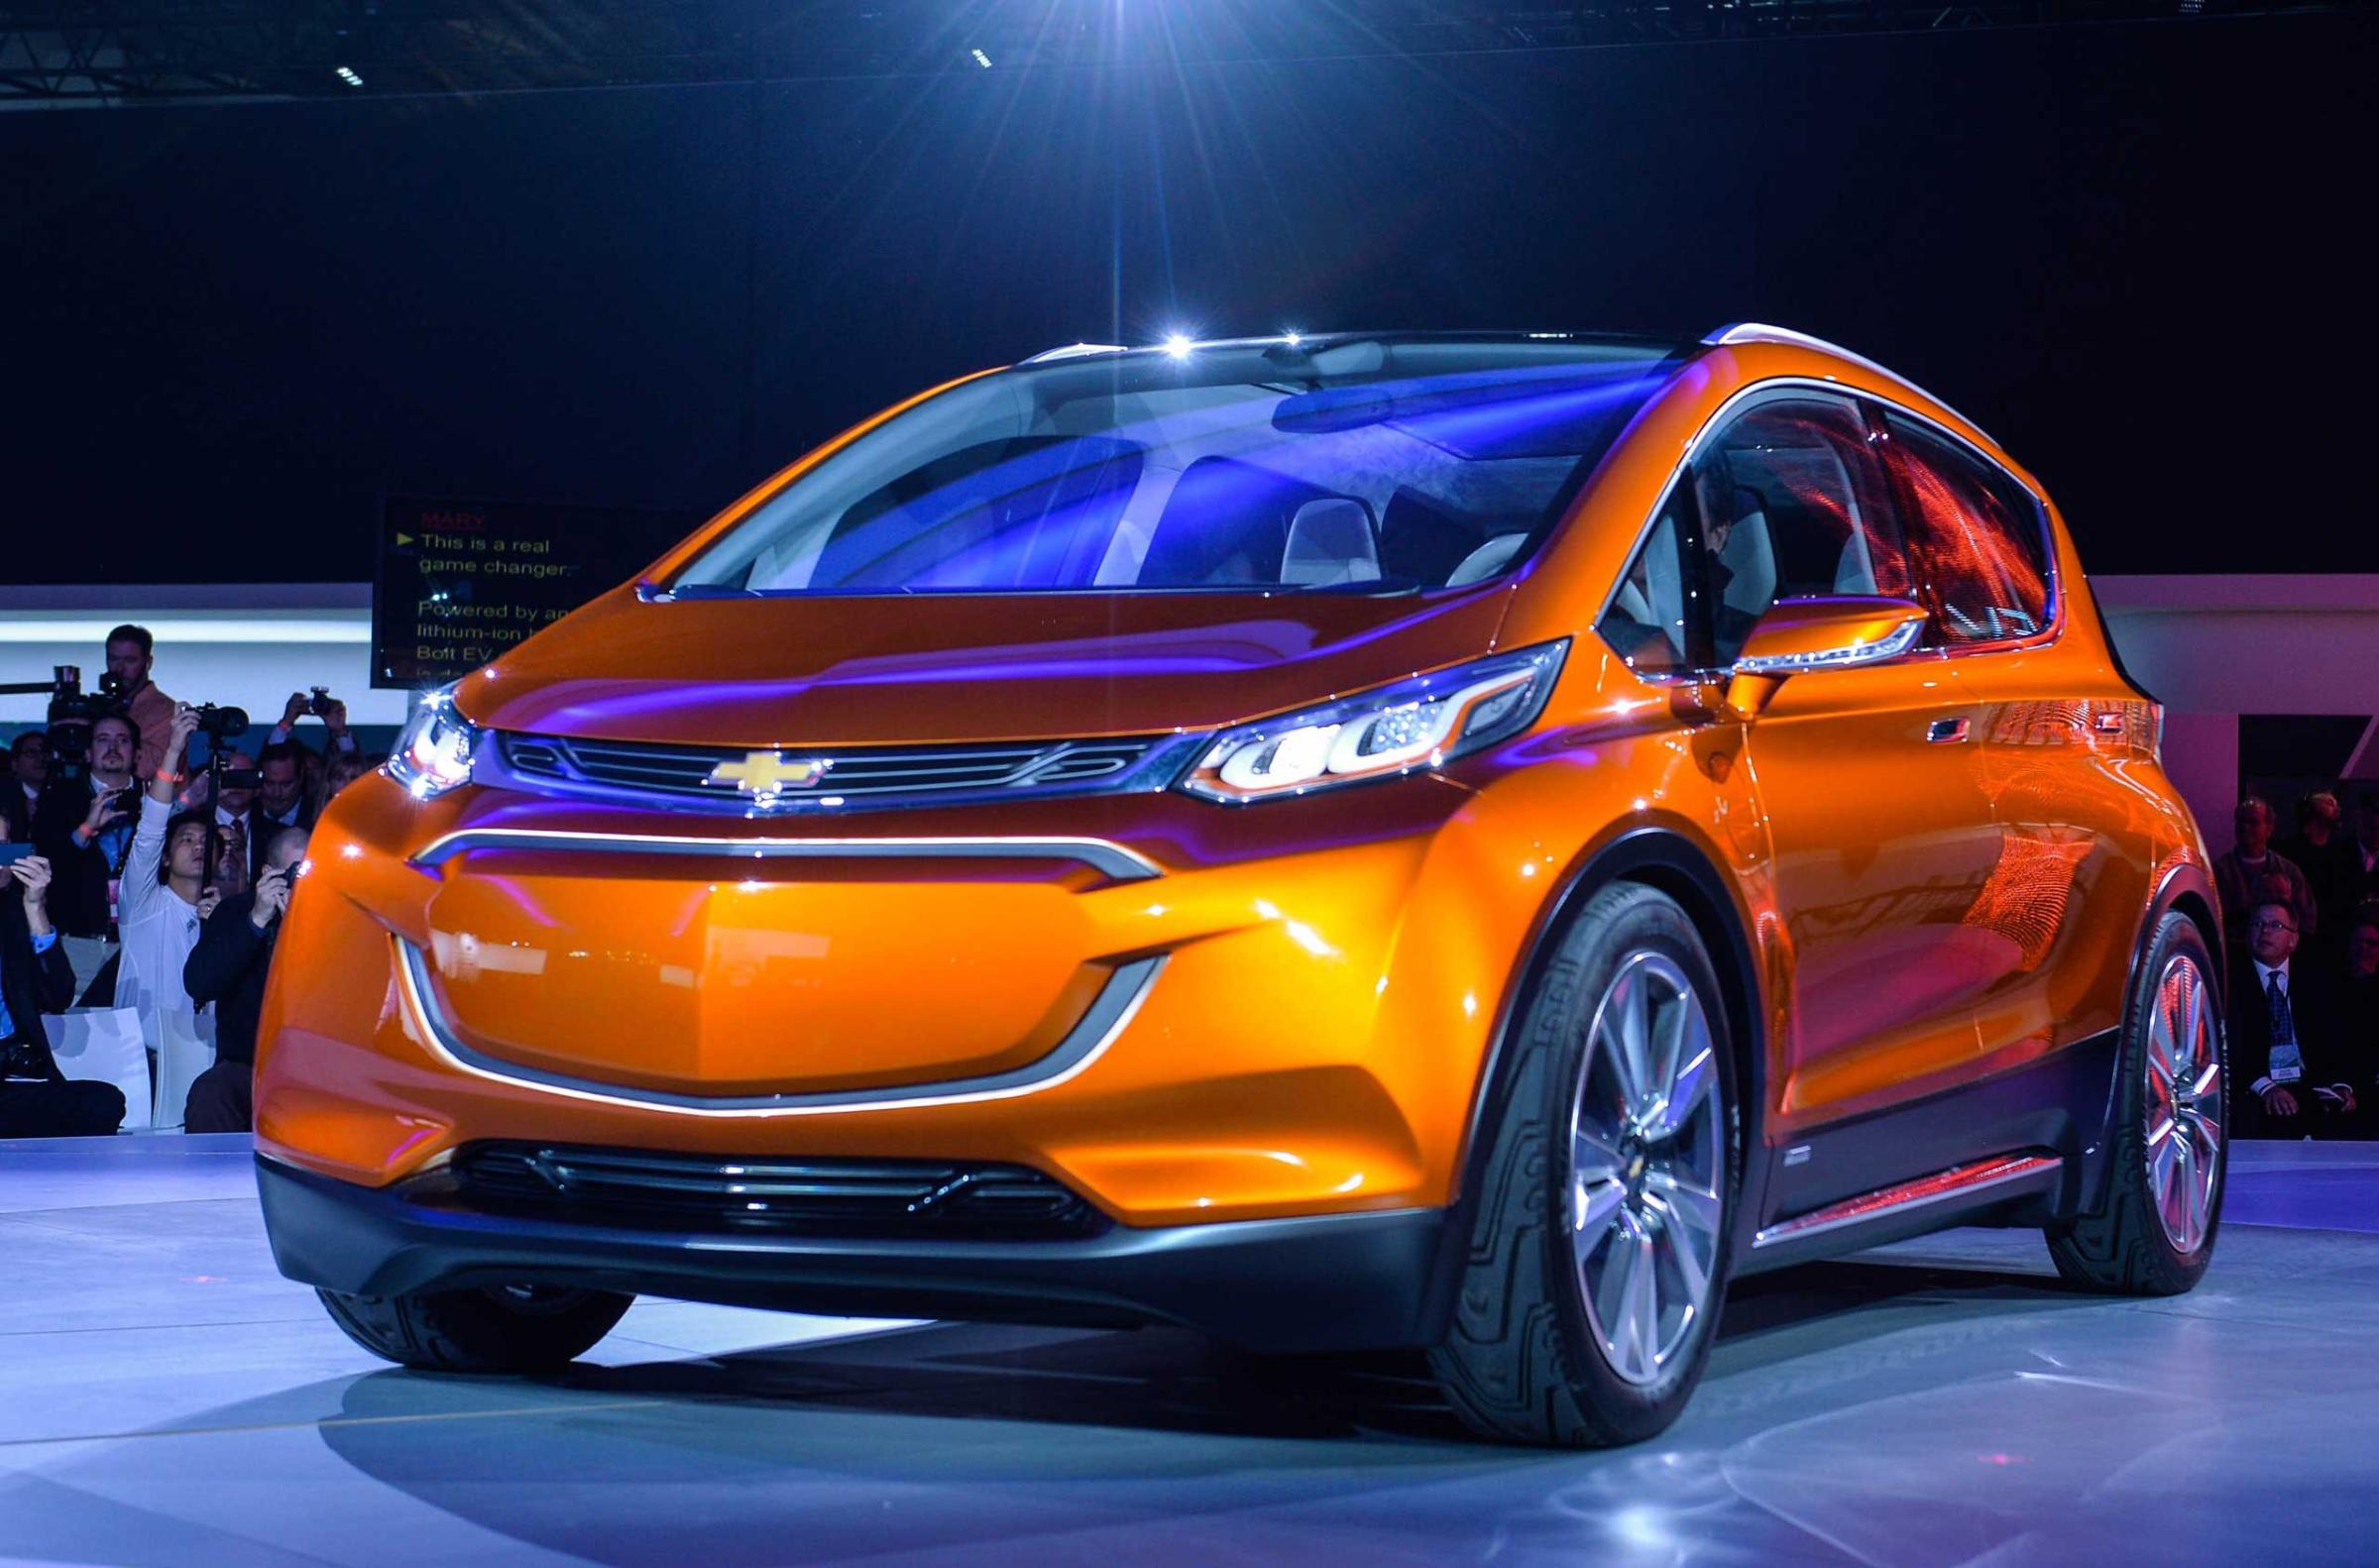 Chevrolet unveils a new concept car bolt during a press preview on Jan. 12, 2015 in Detroit.